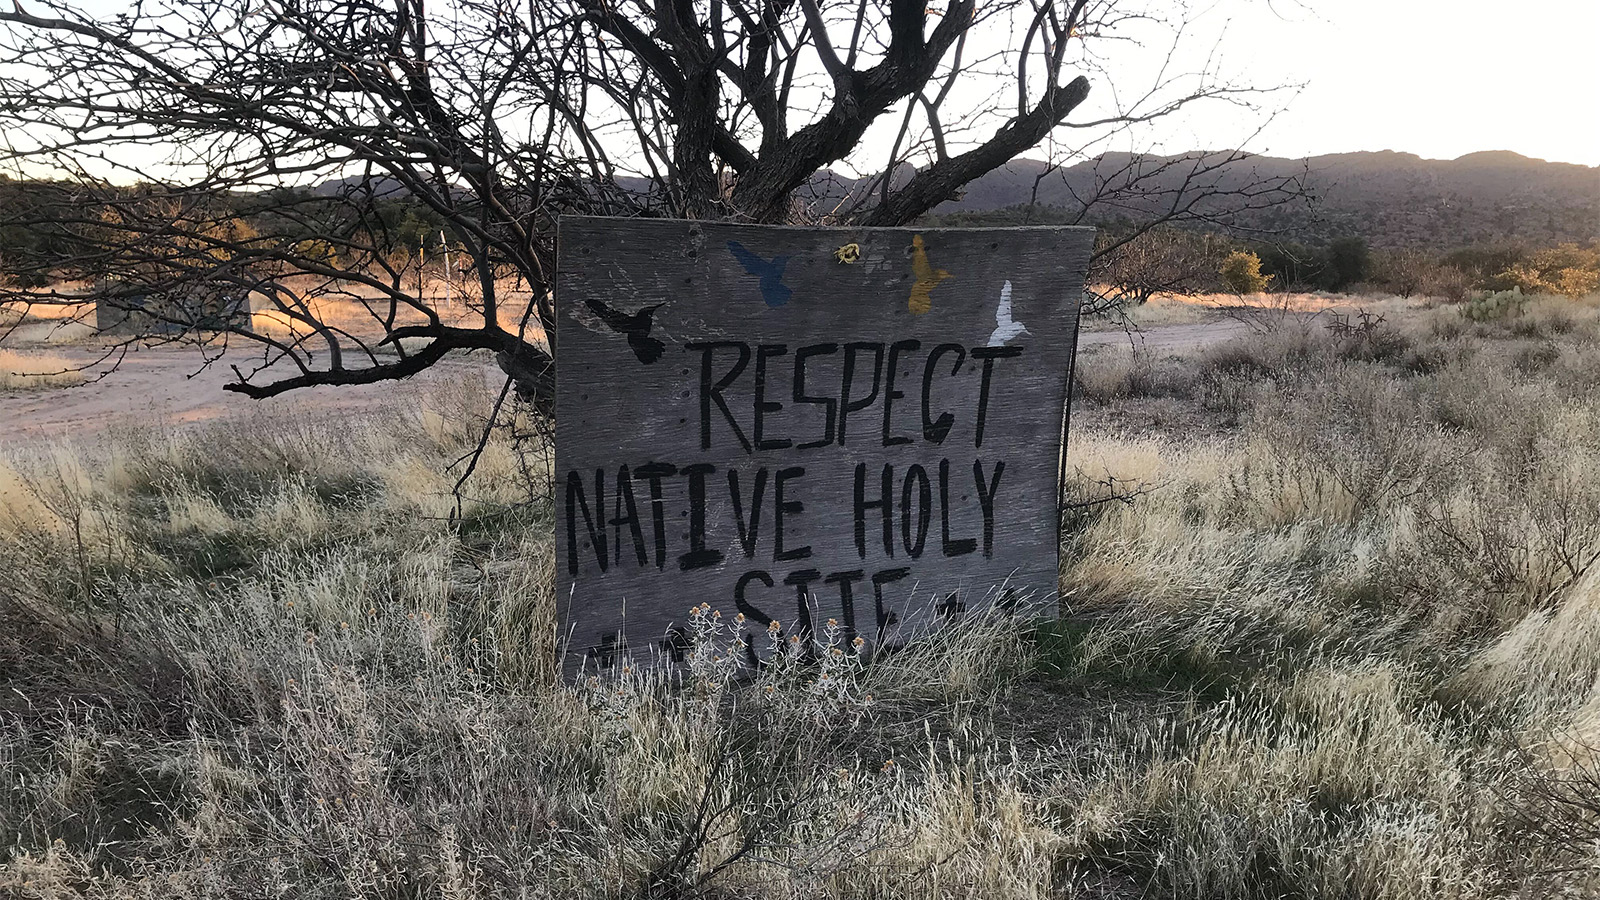 Signs protesting the transfer of Oak Flat stand just outside the Oak Flat campground in Arizona’s Tonto National Forest, roughly 70 miles east of Phoenix. RNS photo by Alejandra Molina